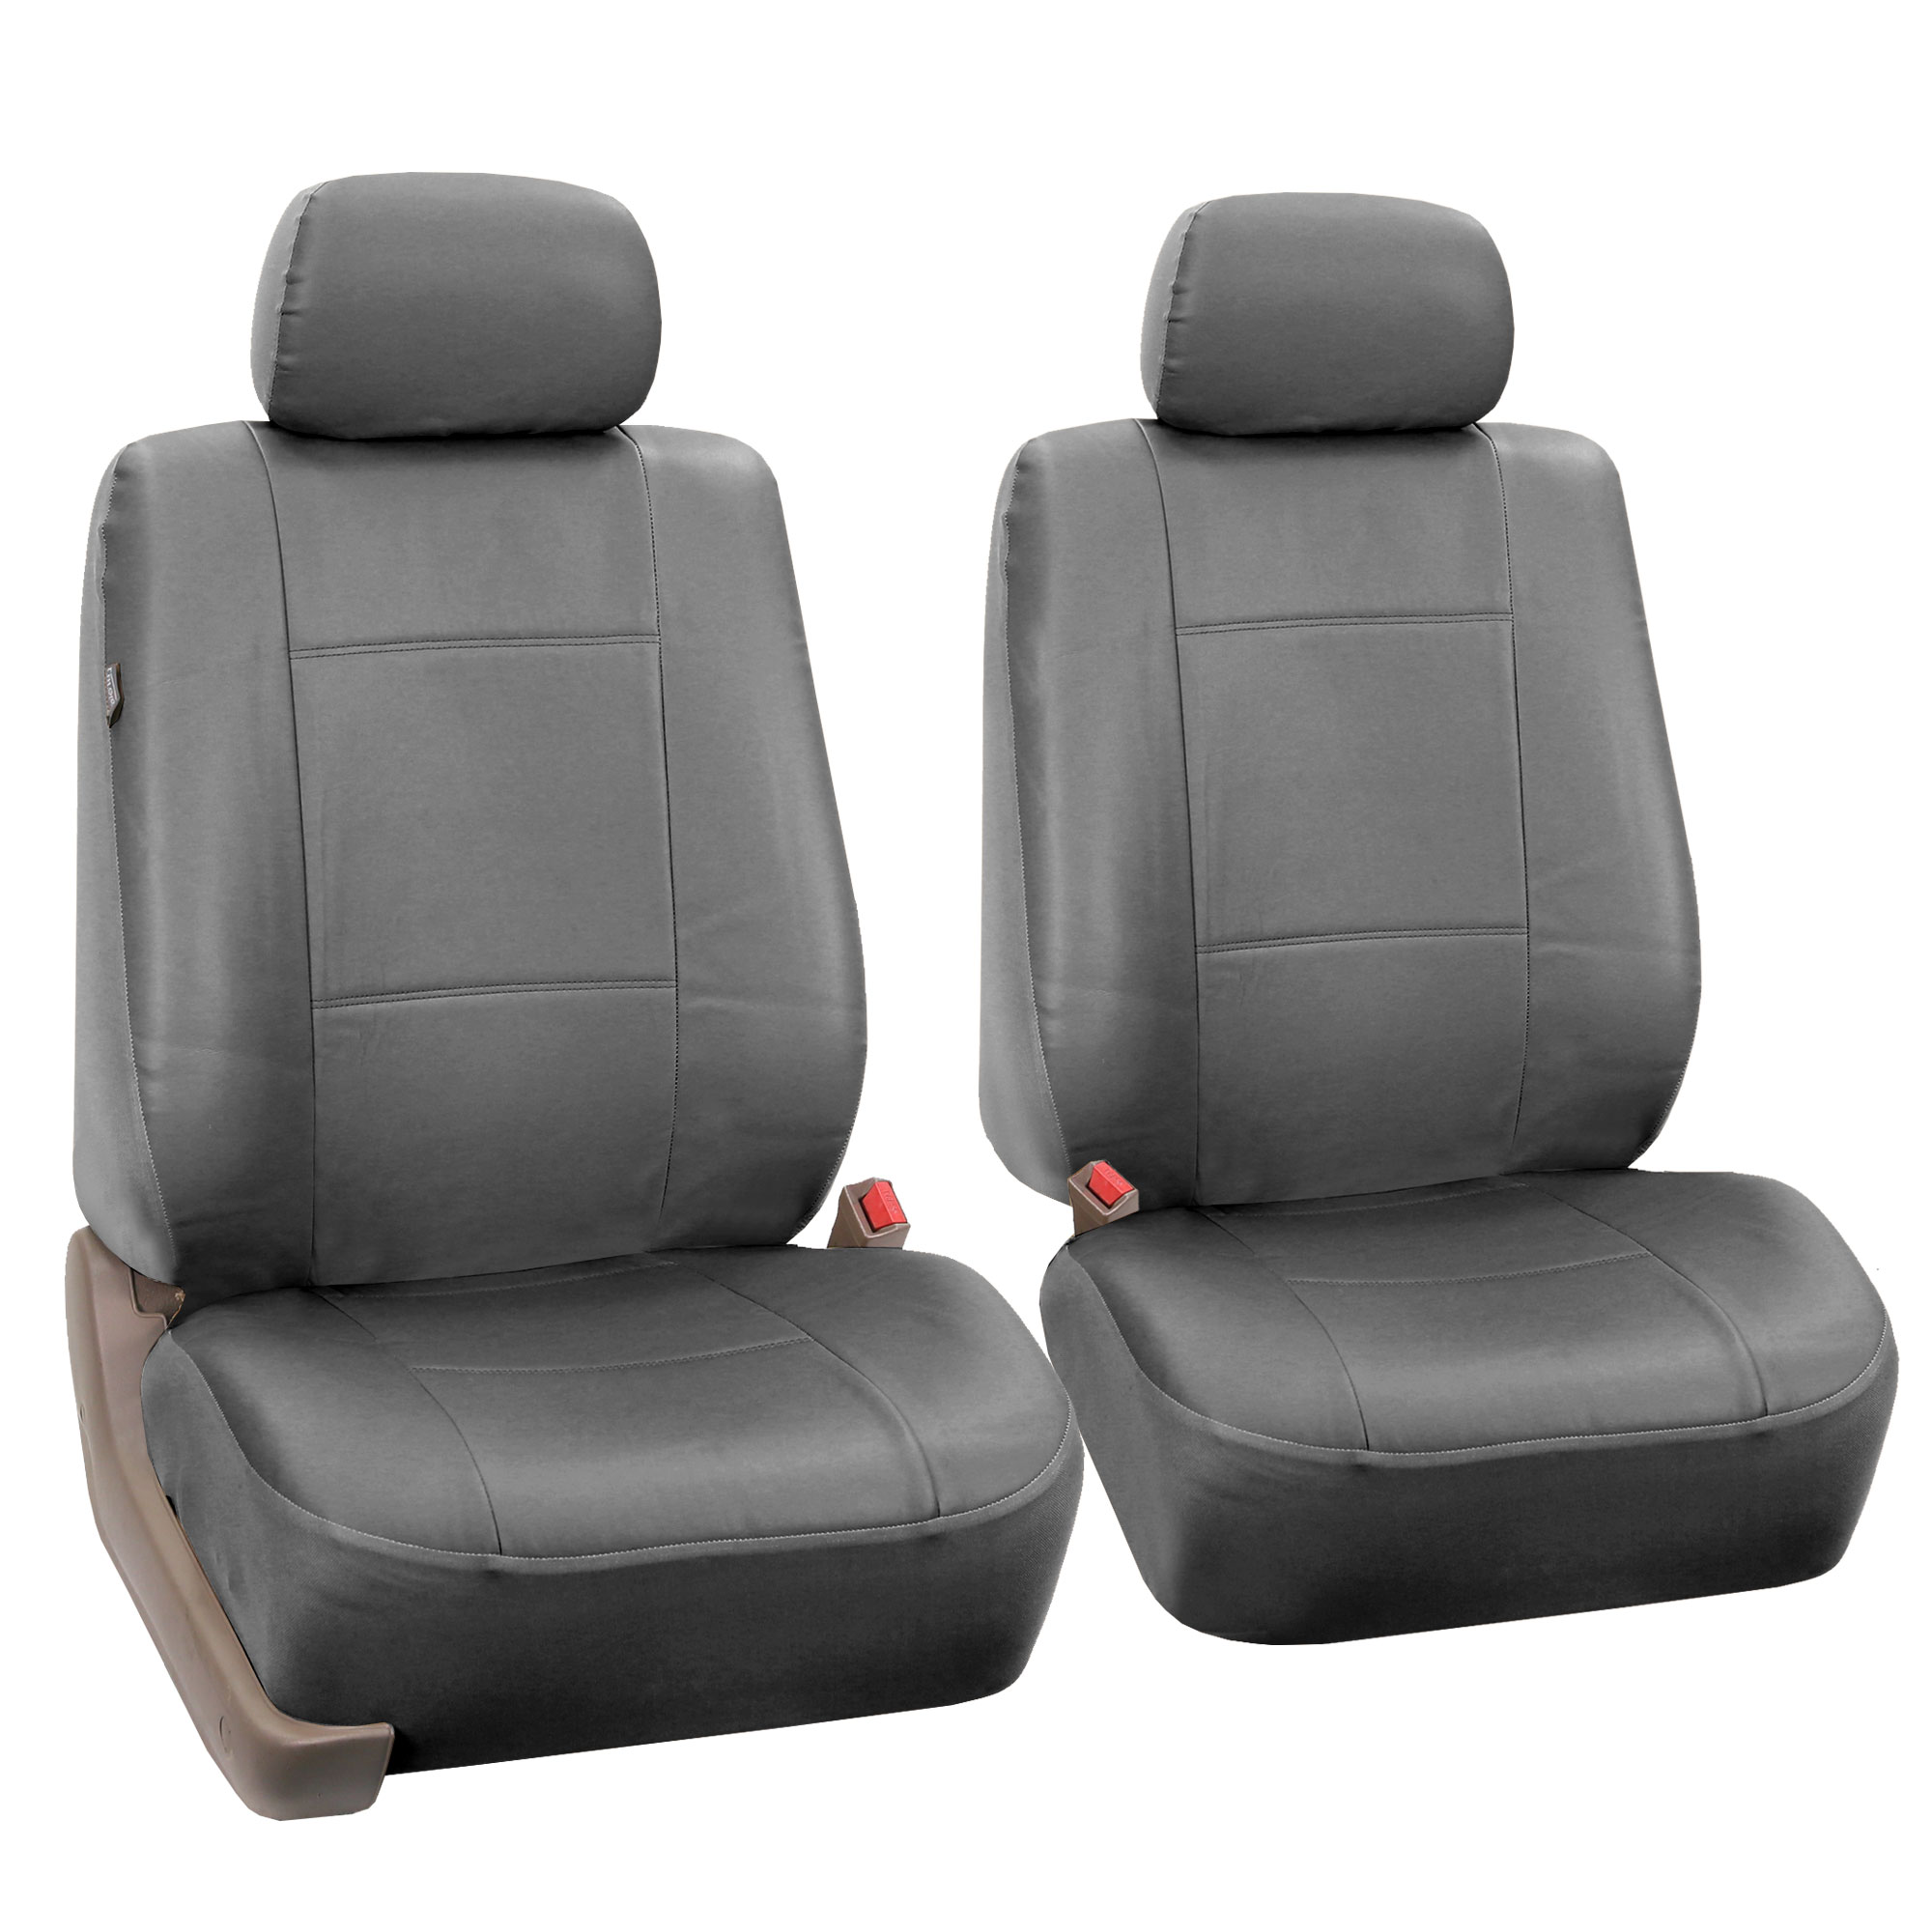 FH Group Faux Leather Airbag Compatible and Split Bench Car Seat Covers, Full Set, Gray - image 2 of 4